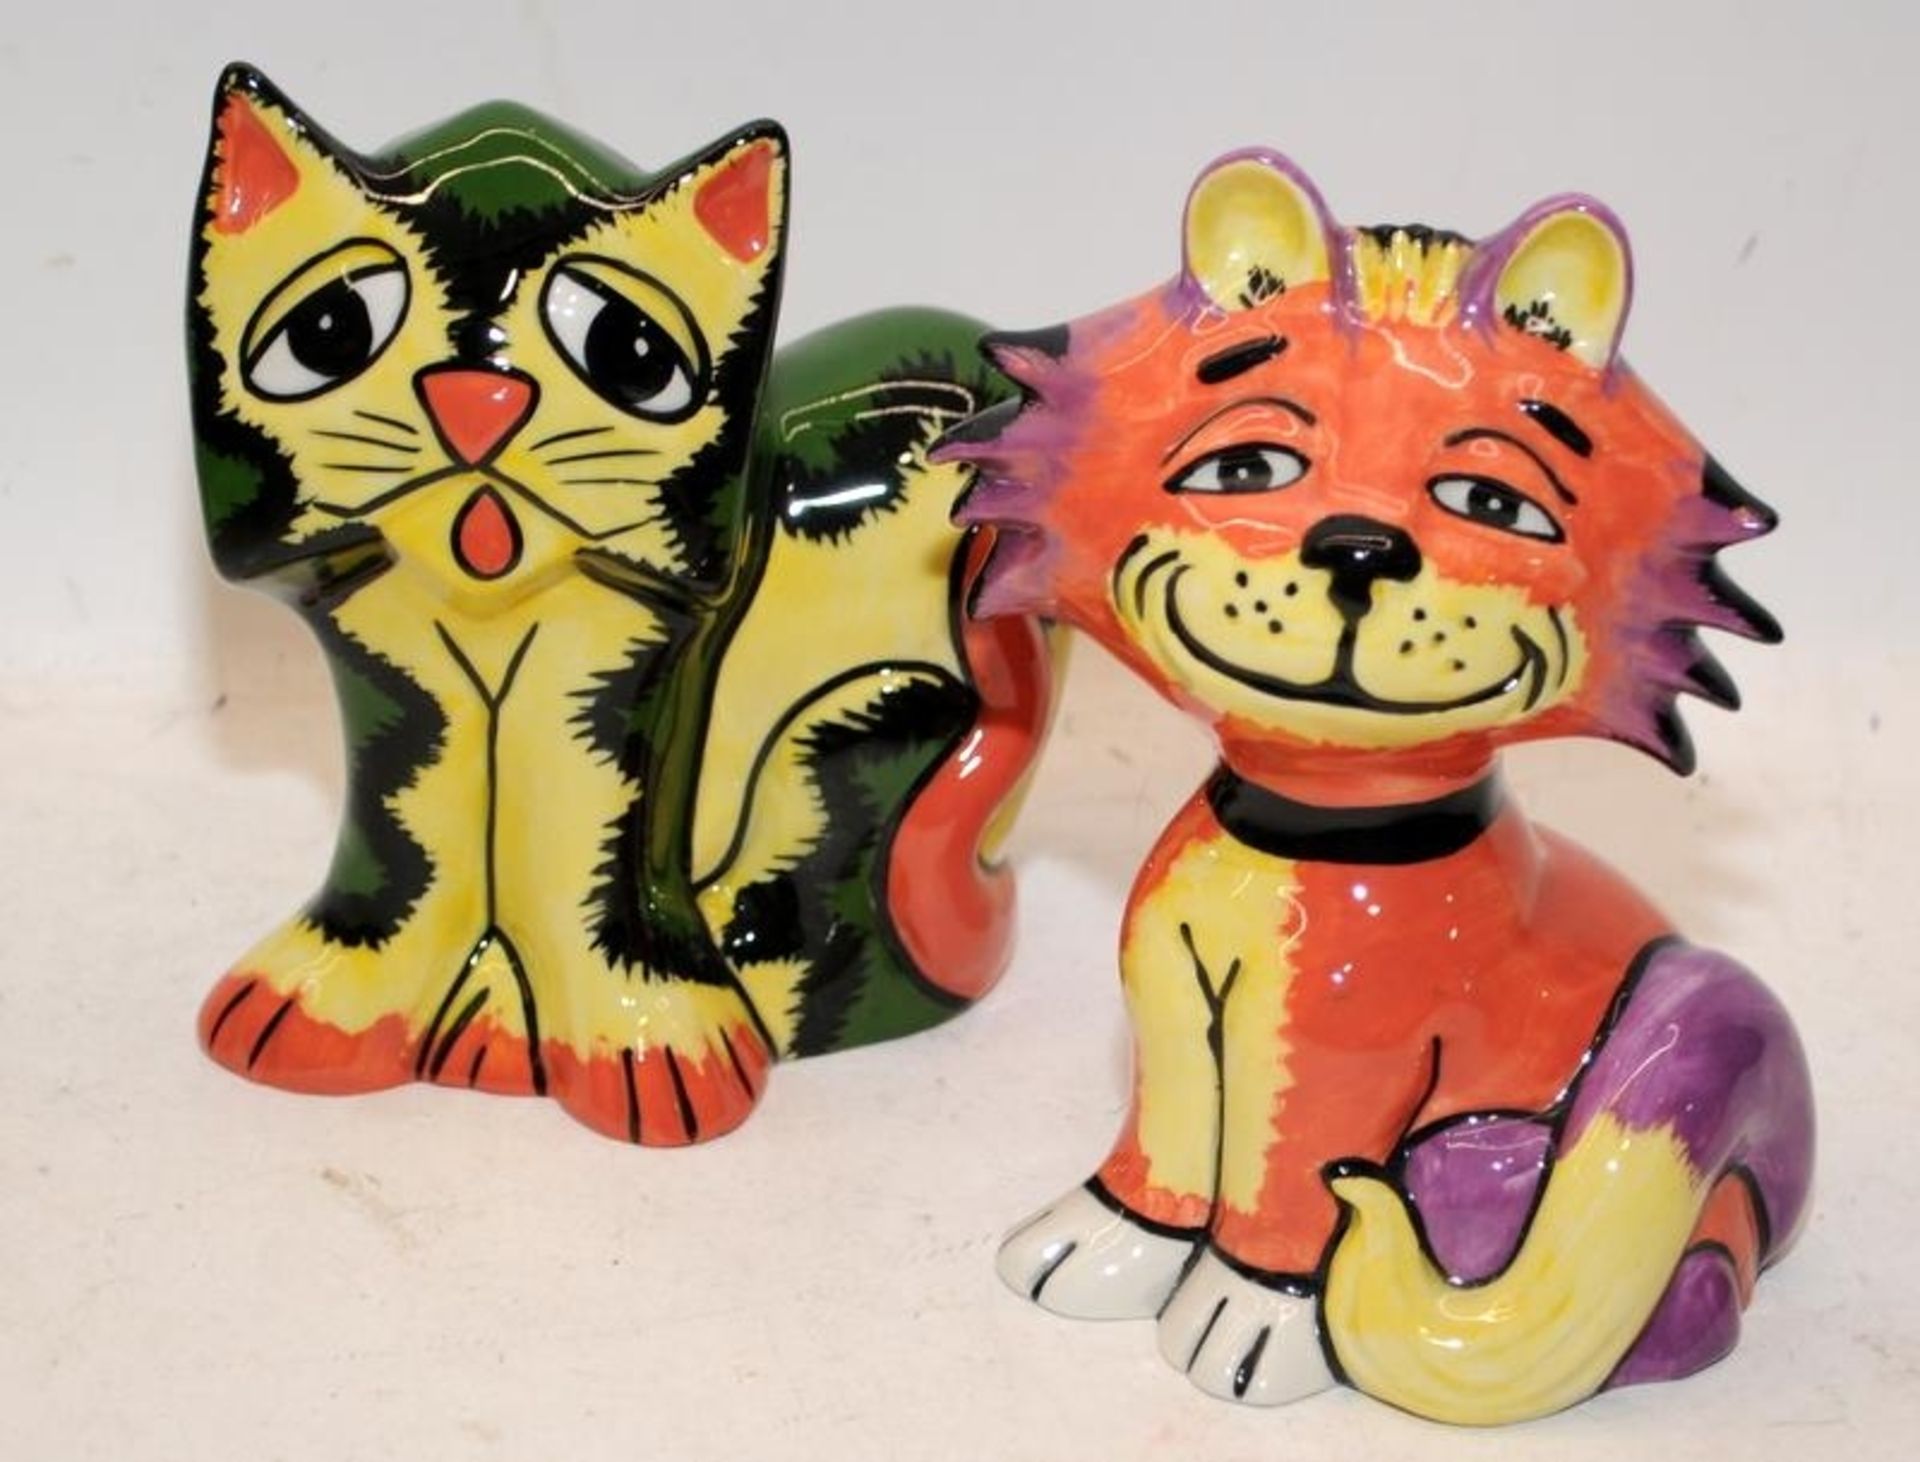 5 x Lorna Bailey cat figures: Sid, Gotcha, Cutie, Jaspurr and one other. All signed. - Image 3 of 3